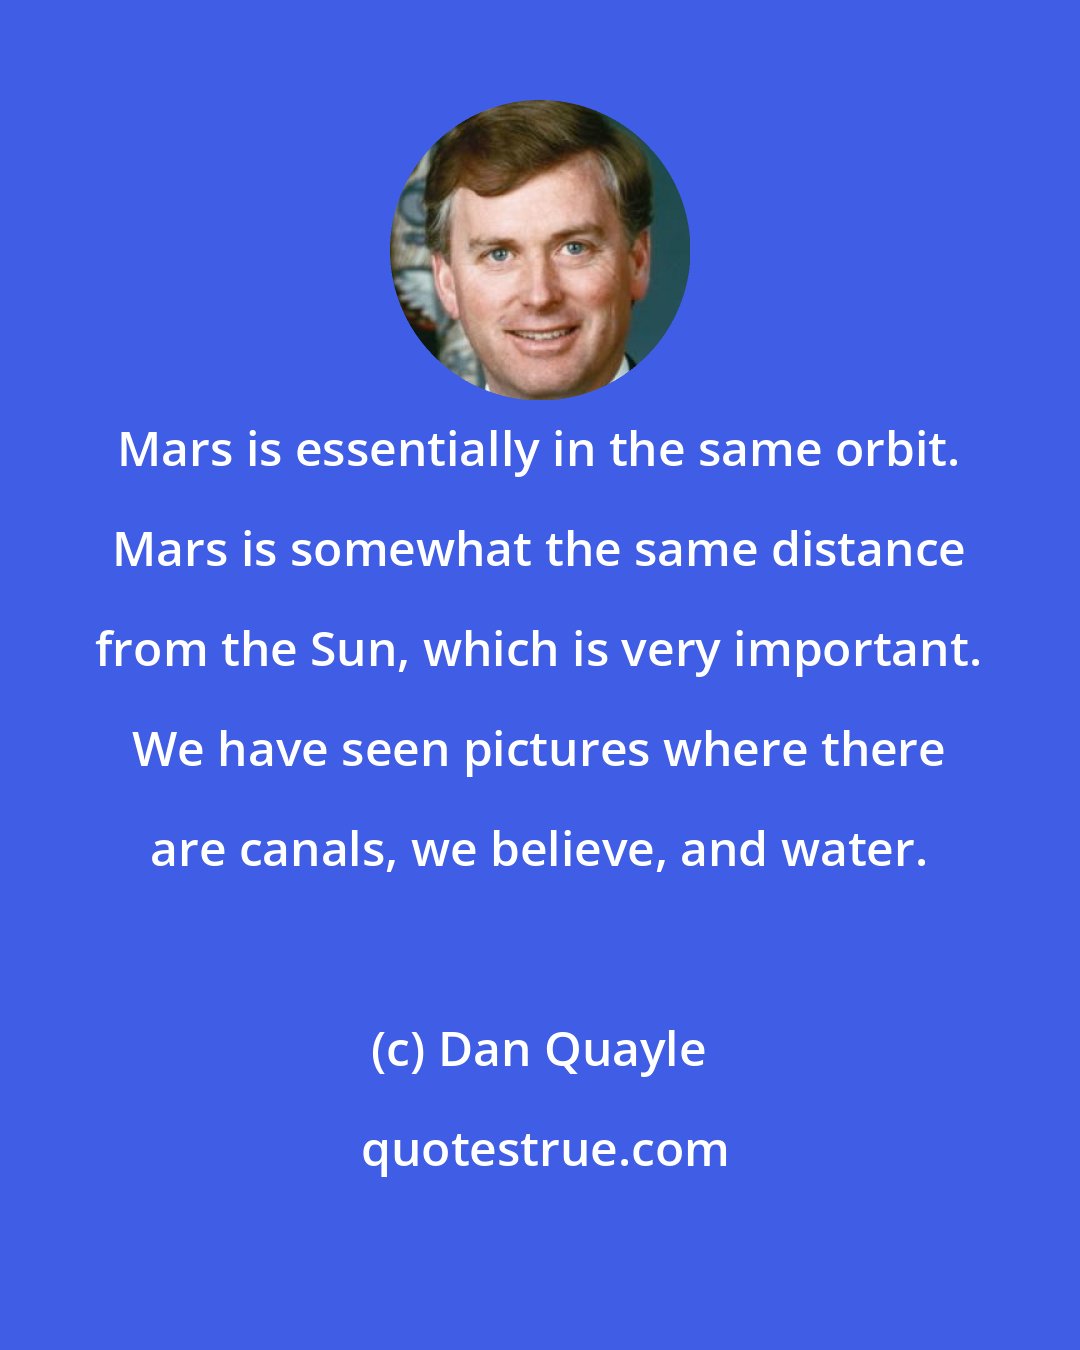 Dan Quayle: Mars is essentially in the same orbit. Mars is somewhat the same distance from the Sun, which is very important. We have seen pictures where there are canals, we believe, and water.